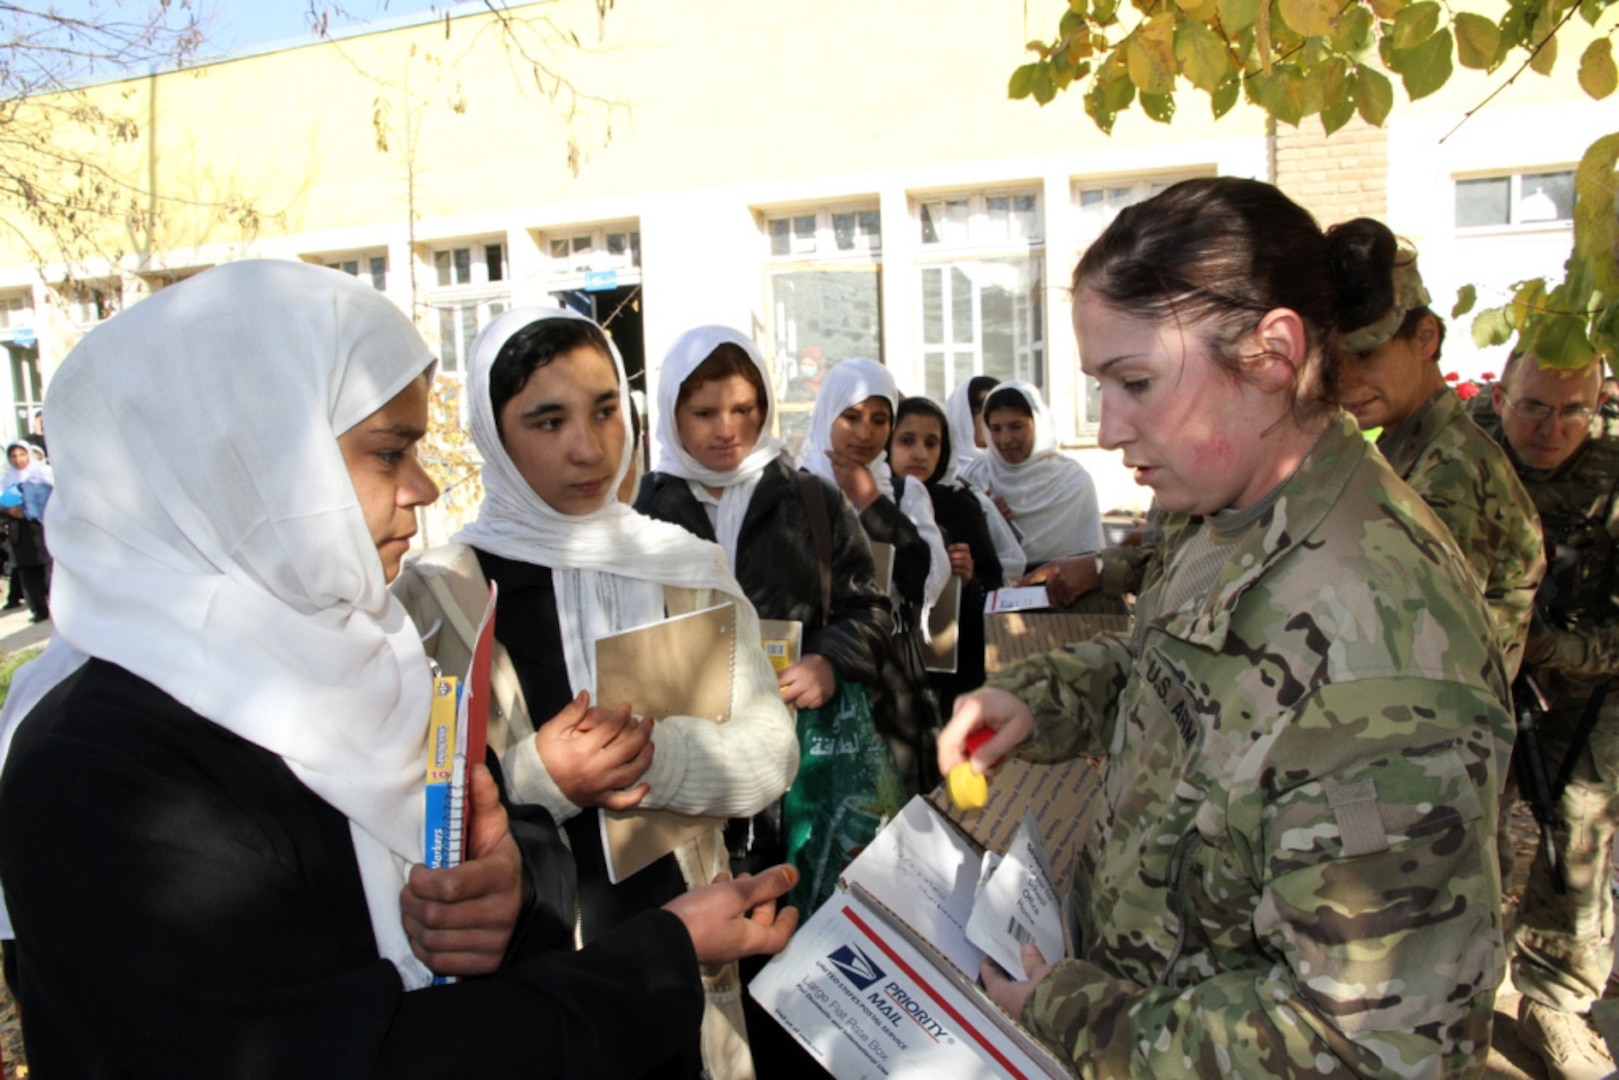 Army Sgt. Heather Carrier, a Kentucky Guard member with Agribusiness Development Team 3, passes out school supplies to Afghan students at a local school in Kapisa Province, Afghanistan Dec. 3, 2011.